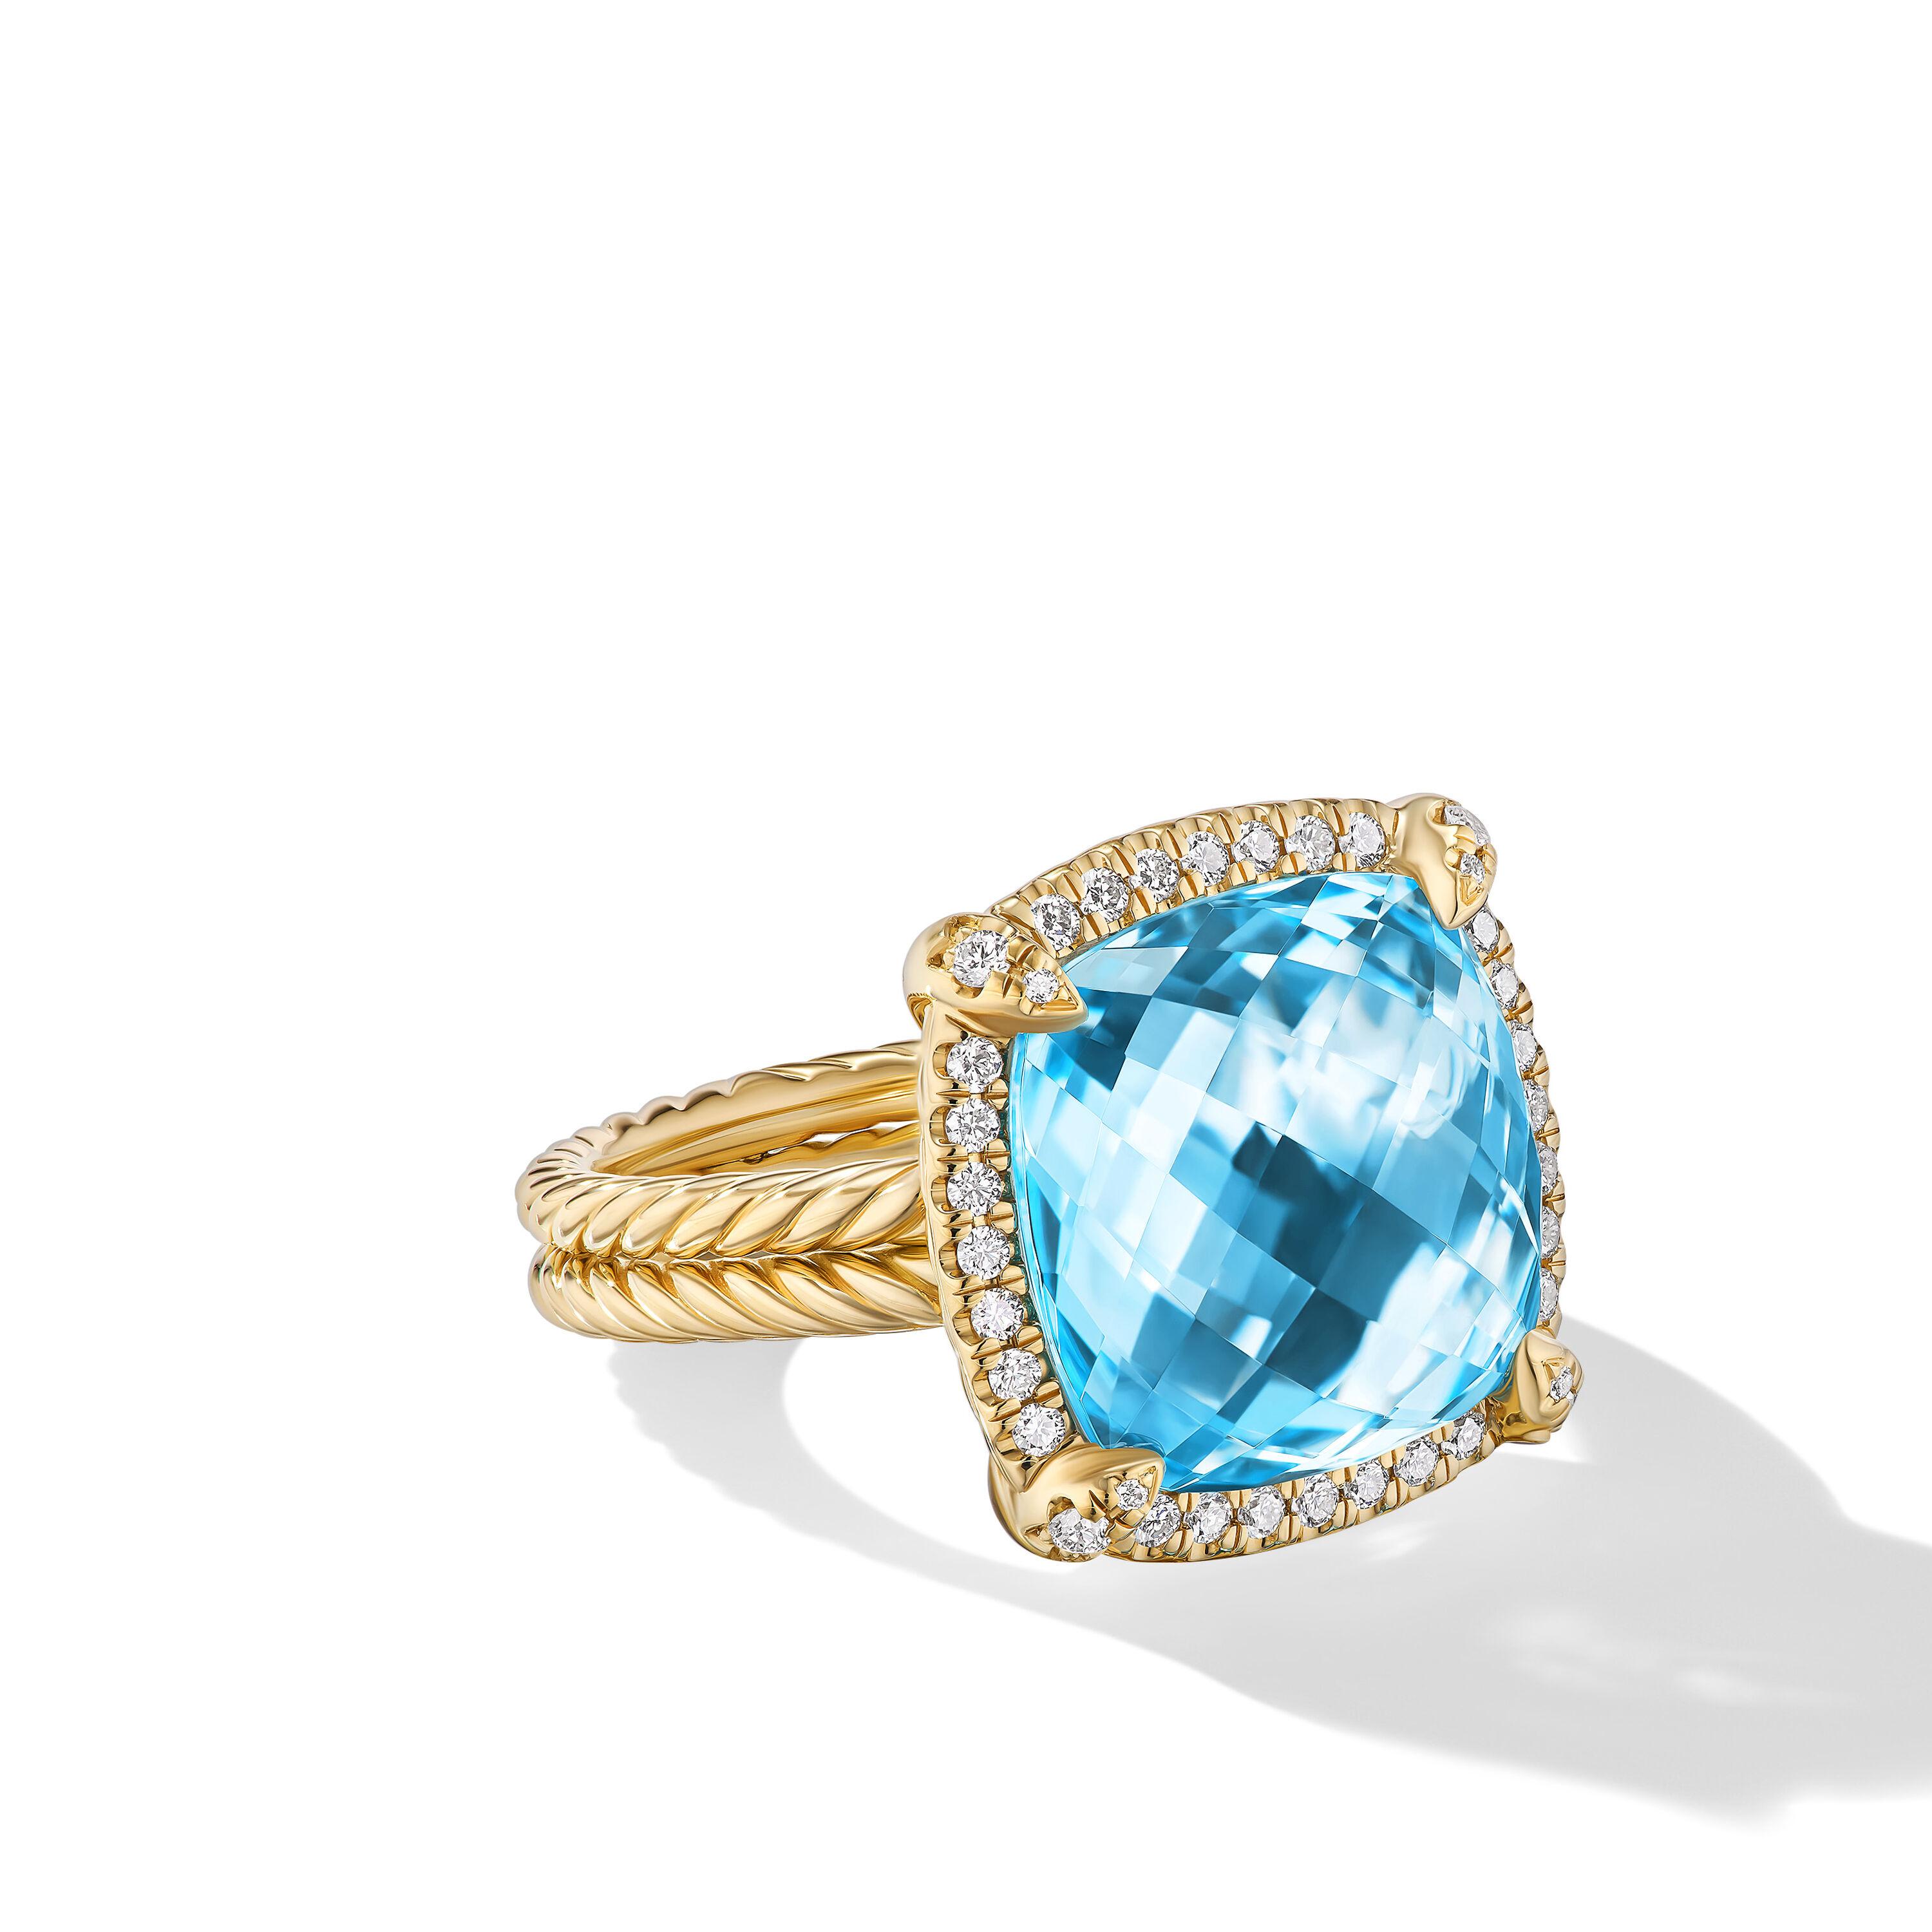 David Yurman Chatelaine 14mm Pave Bezel Ring in 18K Yellow Gold with Blue Topaz and Diamonds 0